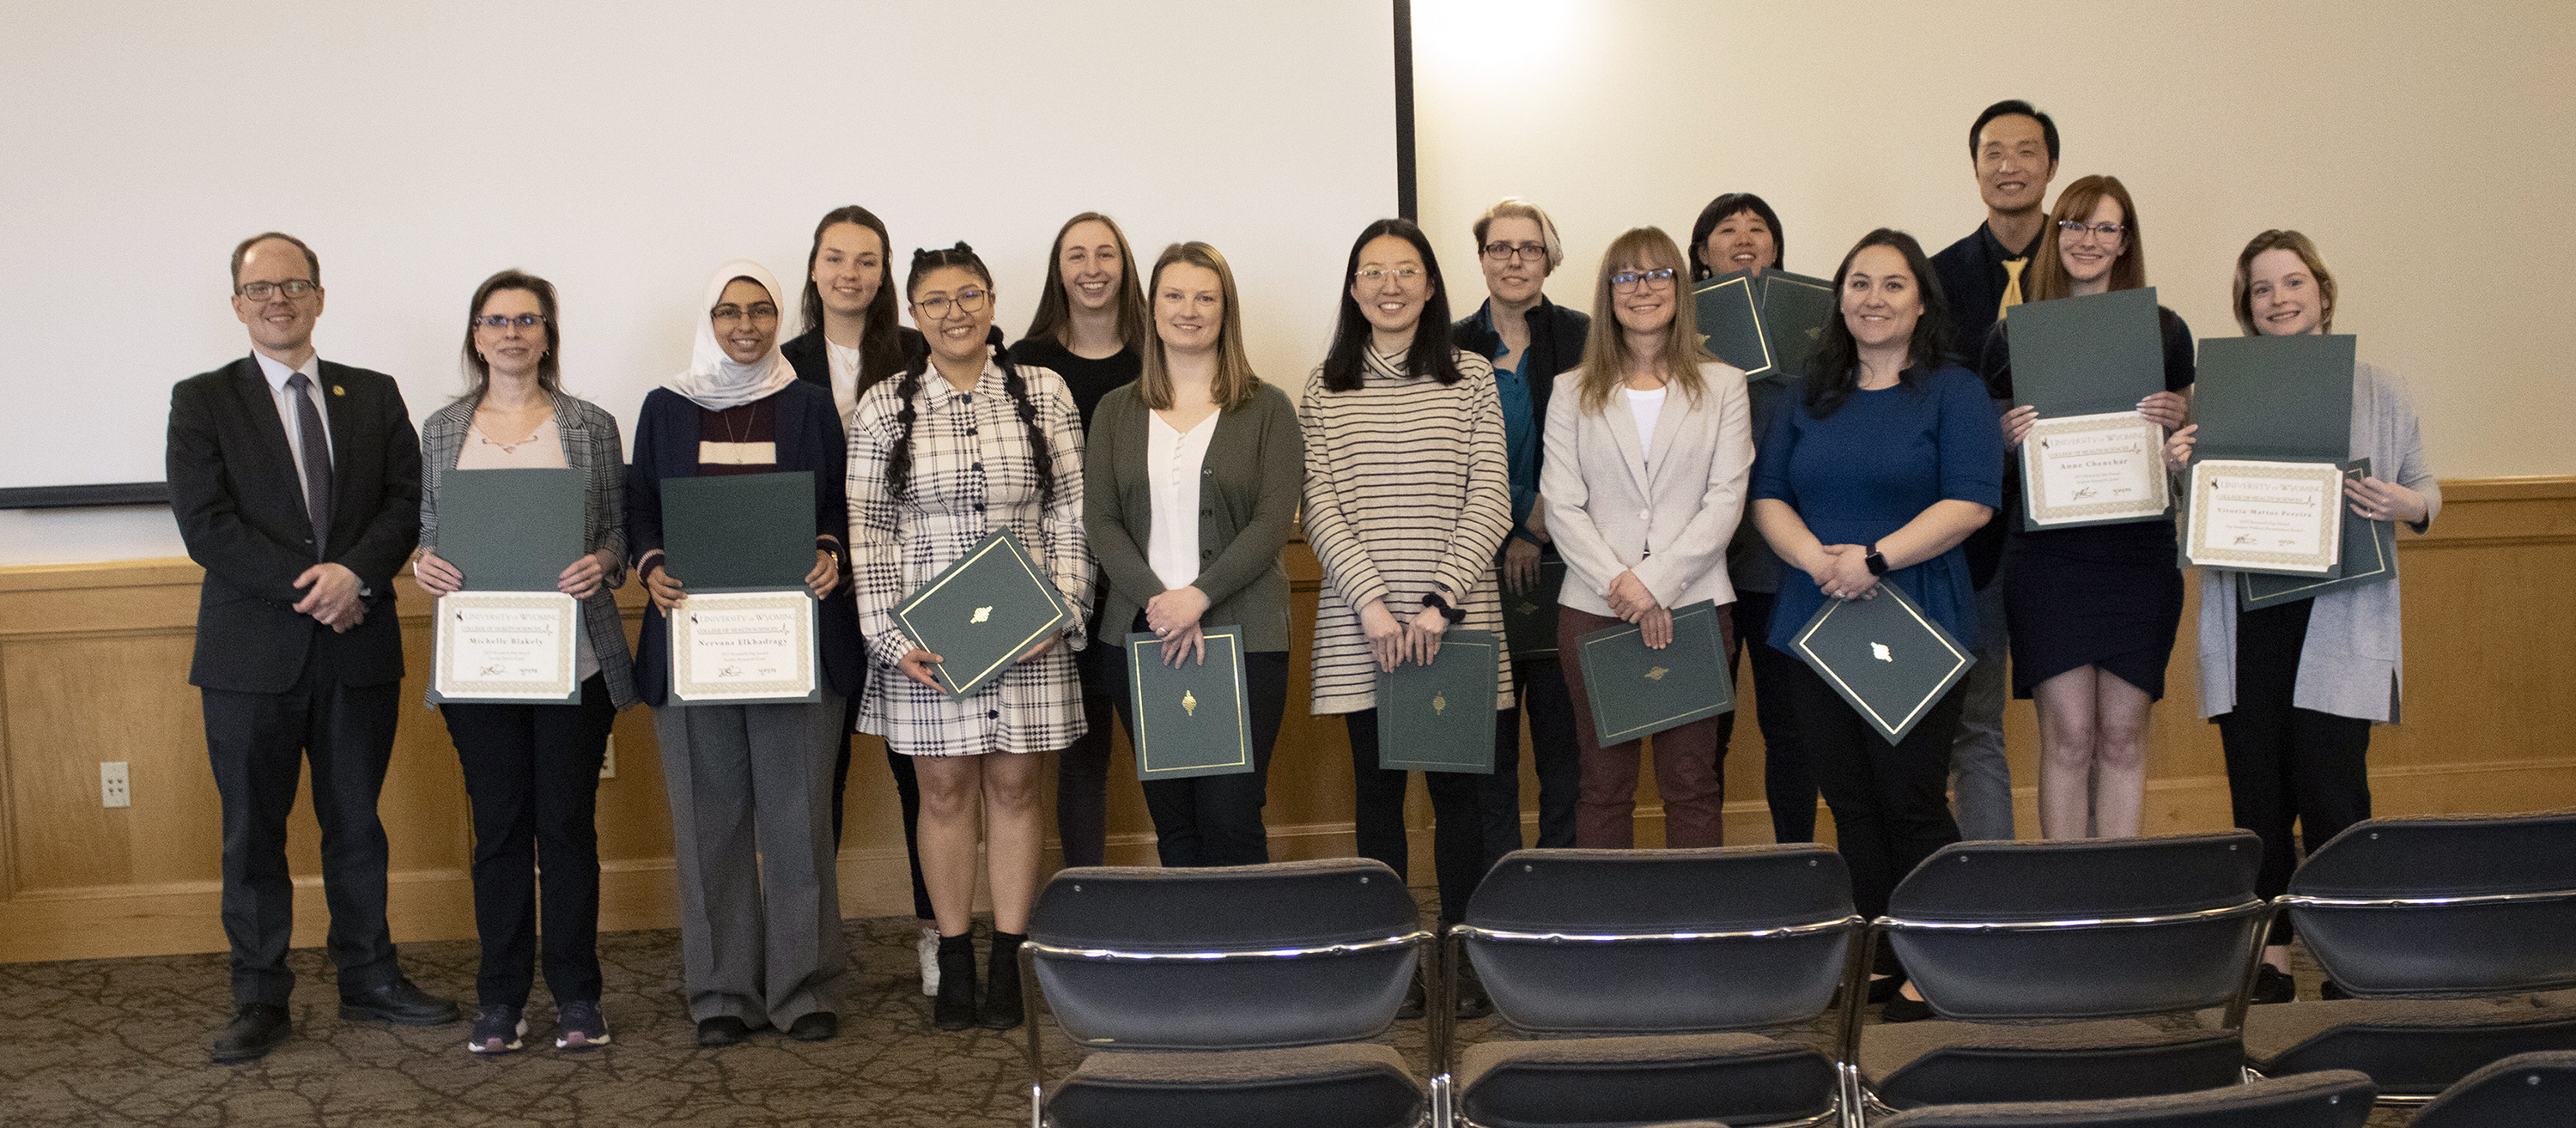 A group of faculty and students being honored for thier research.